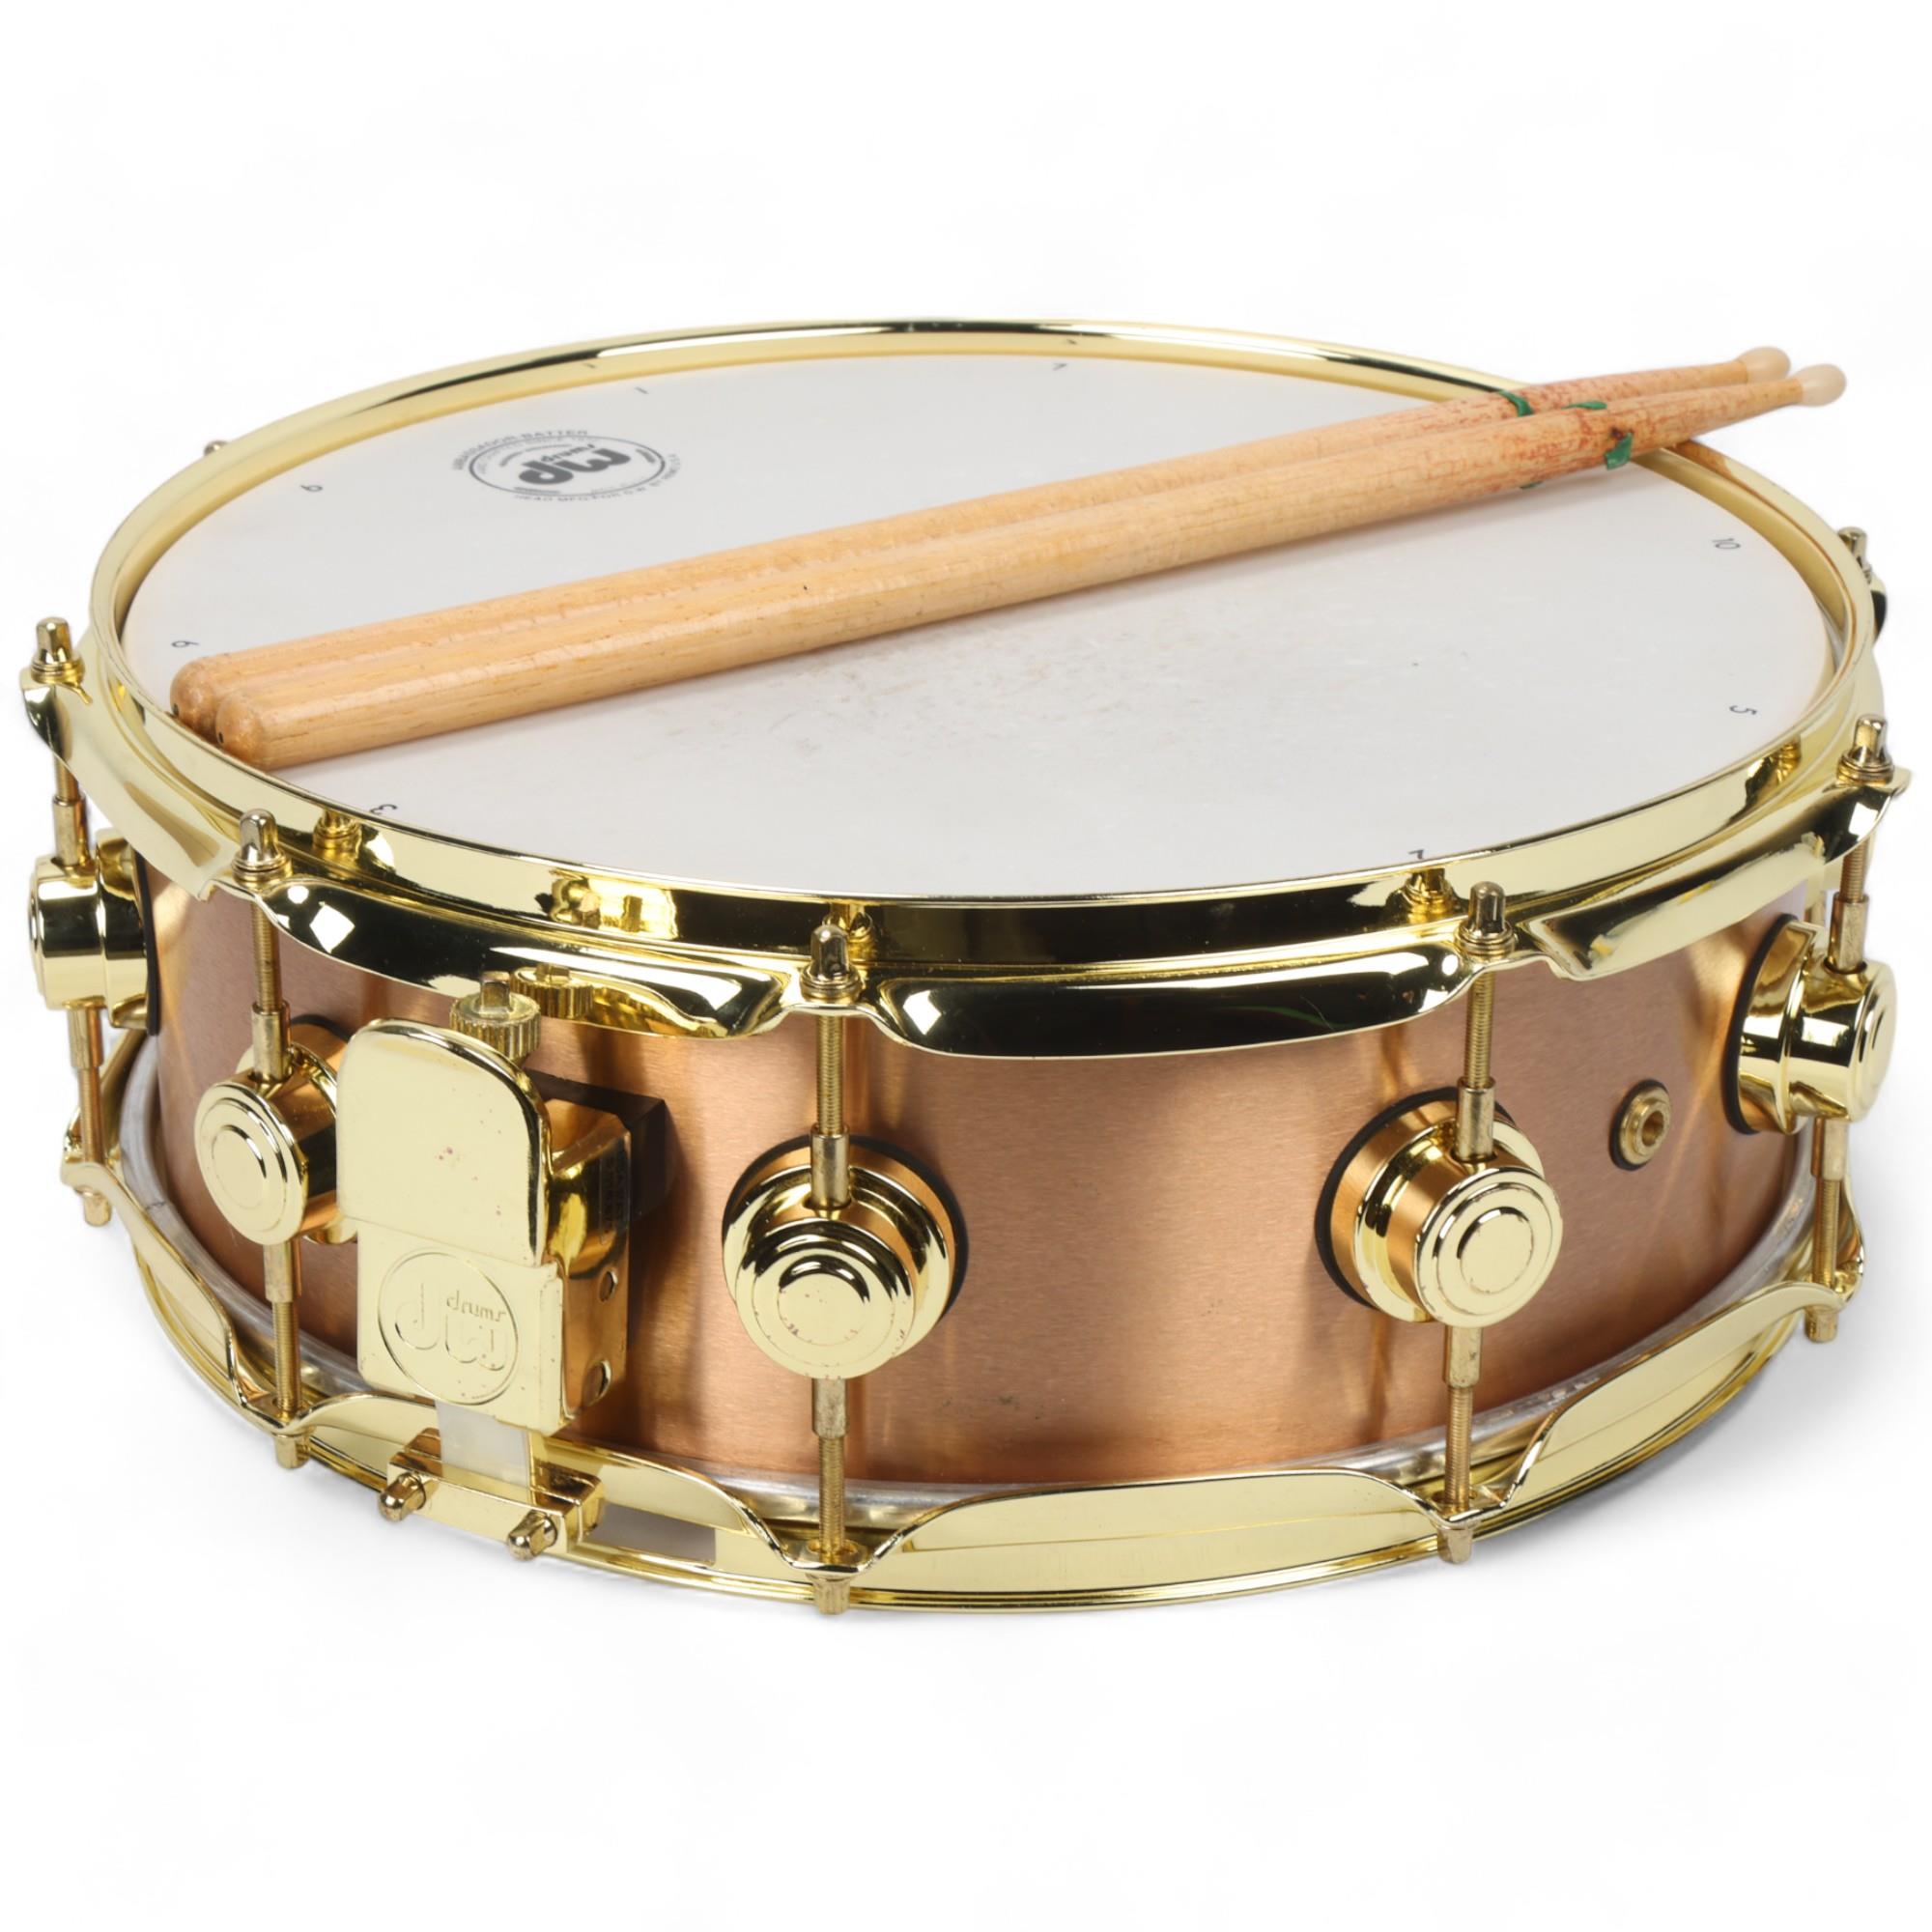 A DW DRUMS Brass Snare owned by MITCH MITCHELL of the JIMI HENDRIX EXPERIENCE. A DW Drums (USA)